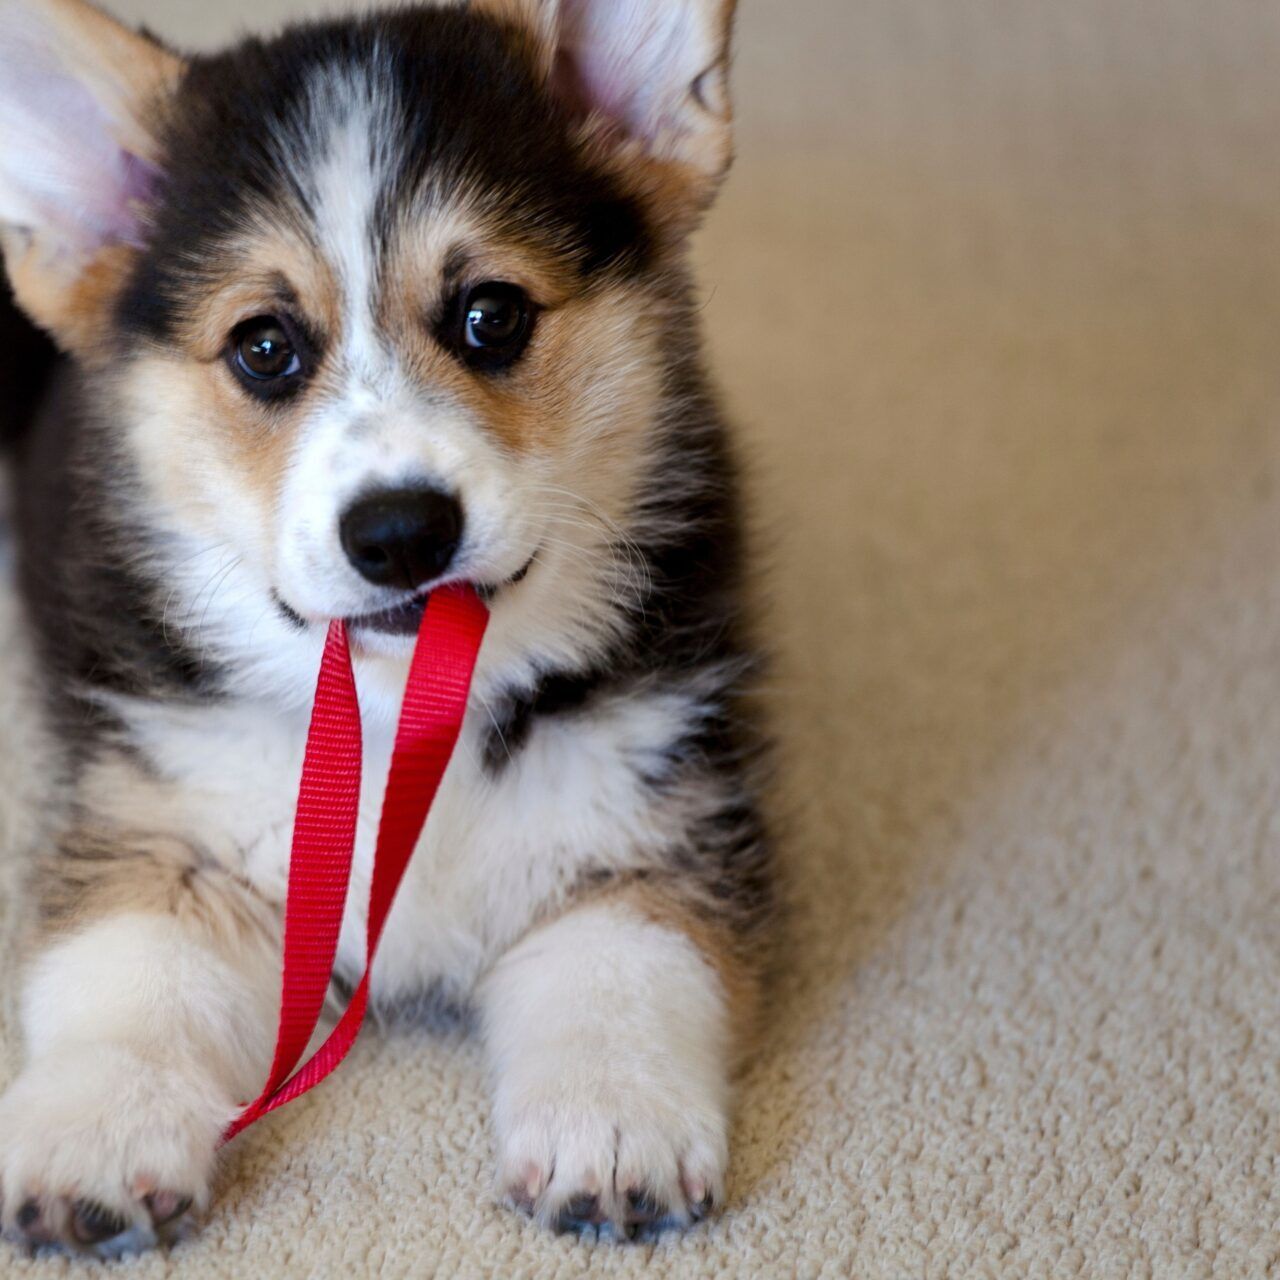 Cute puppy staring at the camera with a red lead in its mouth